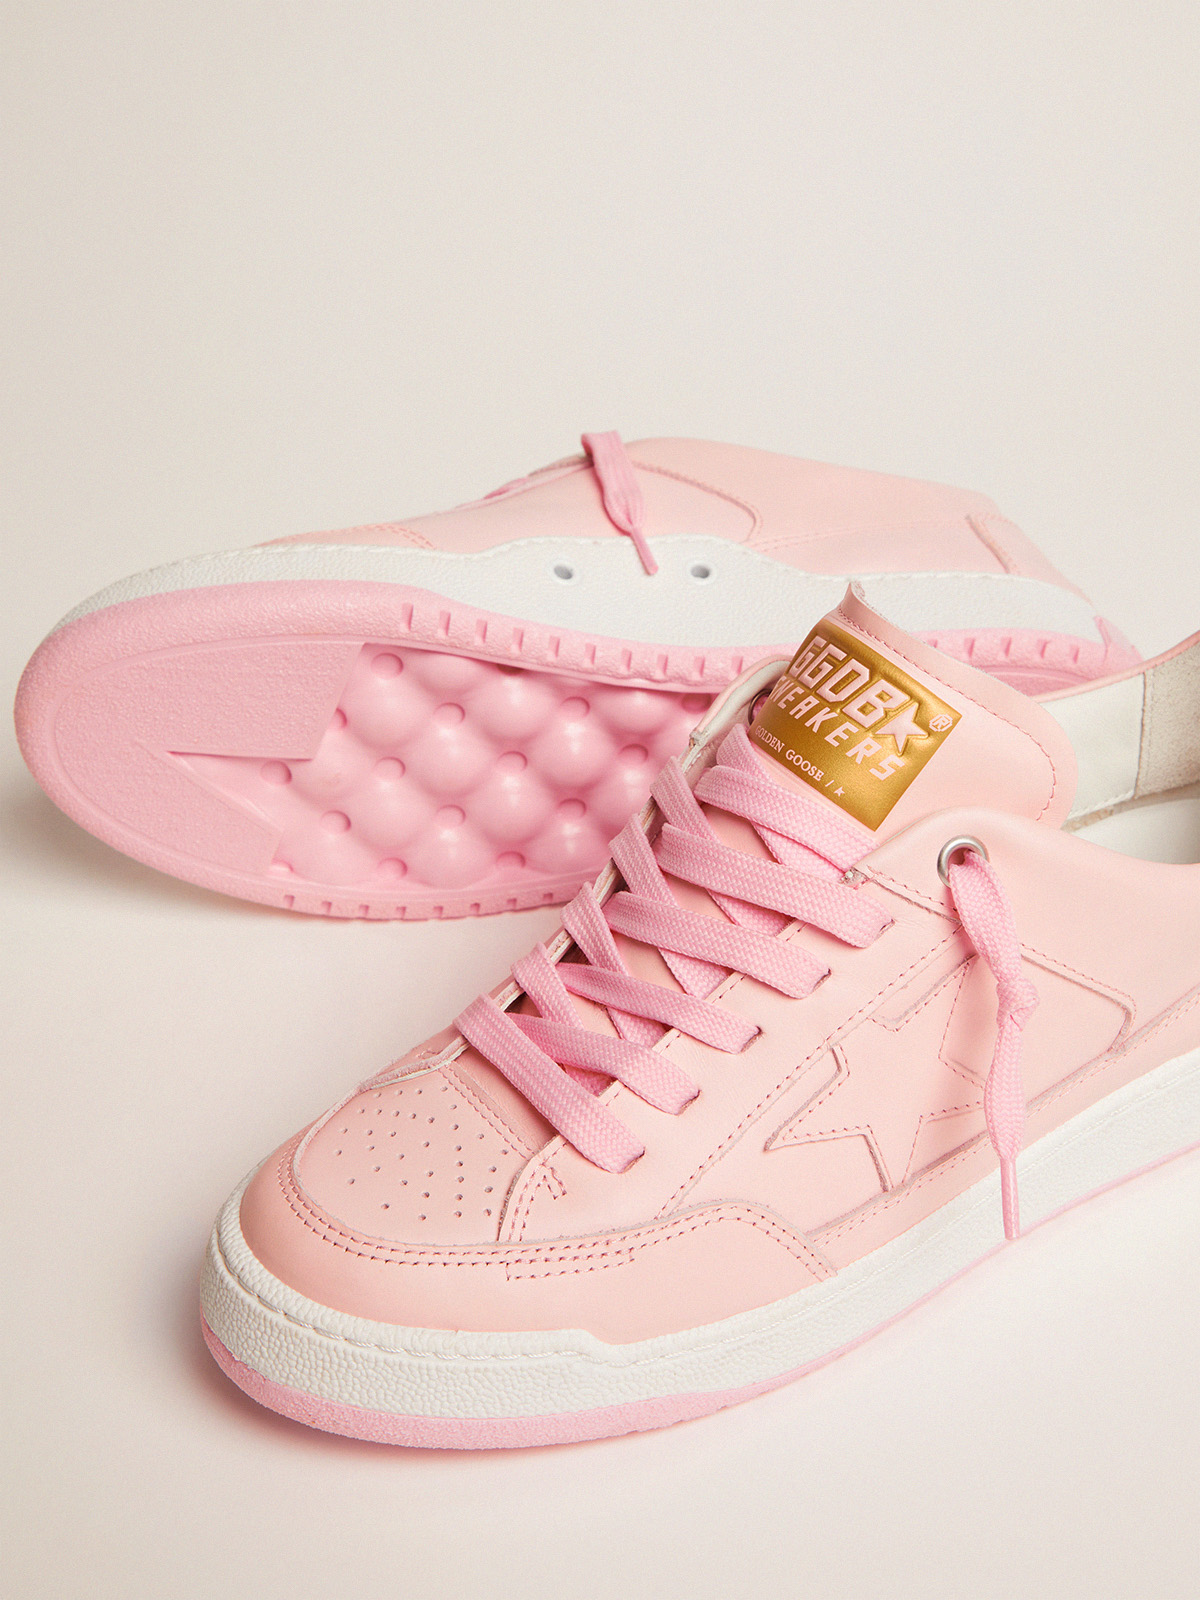 Women's Yeah sneakers in pale pink leather | Golden Goose